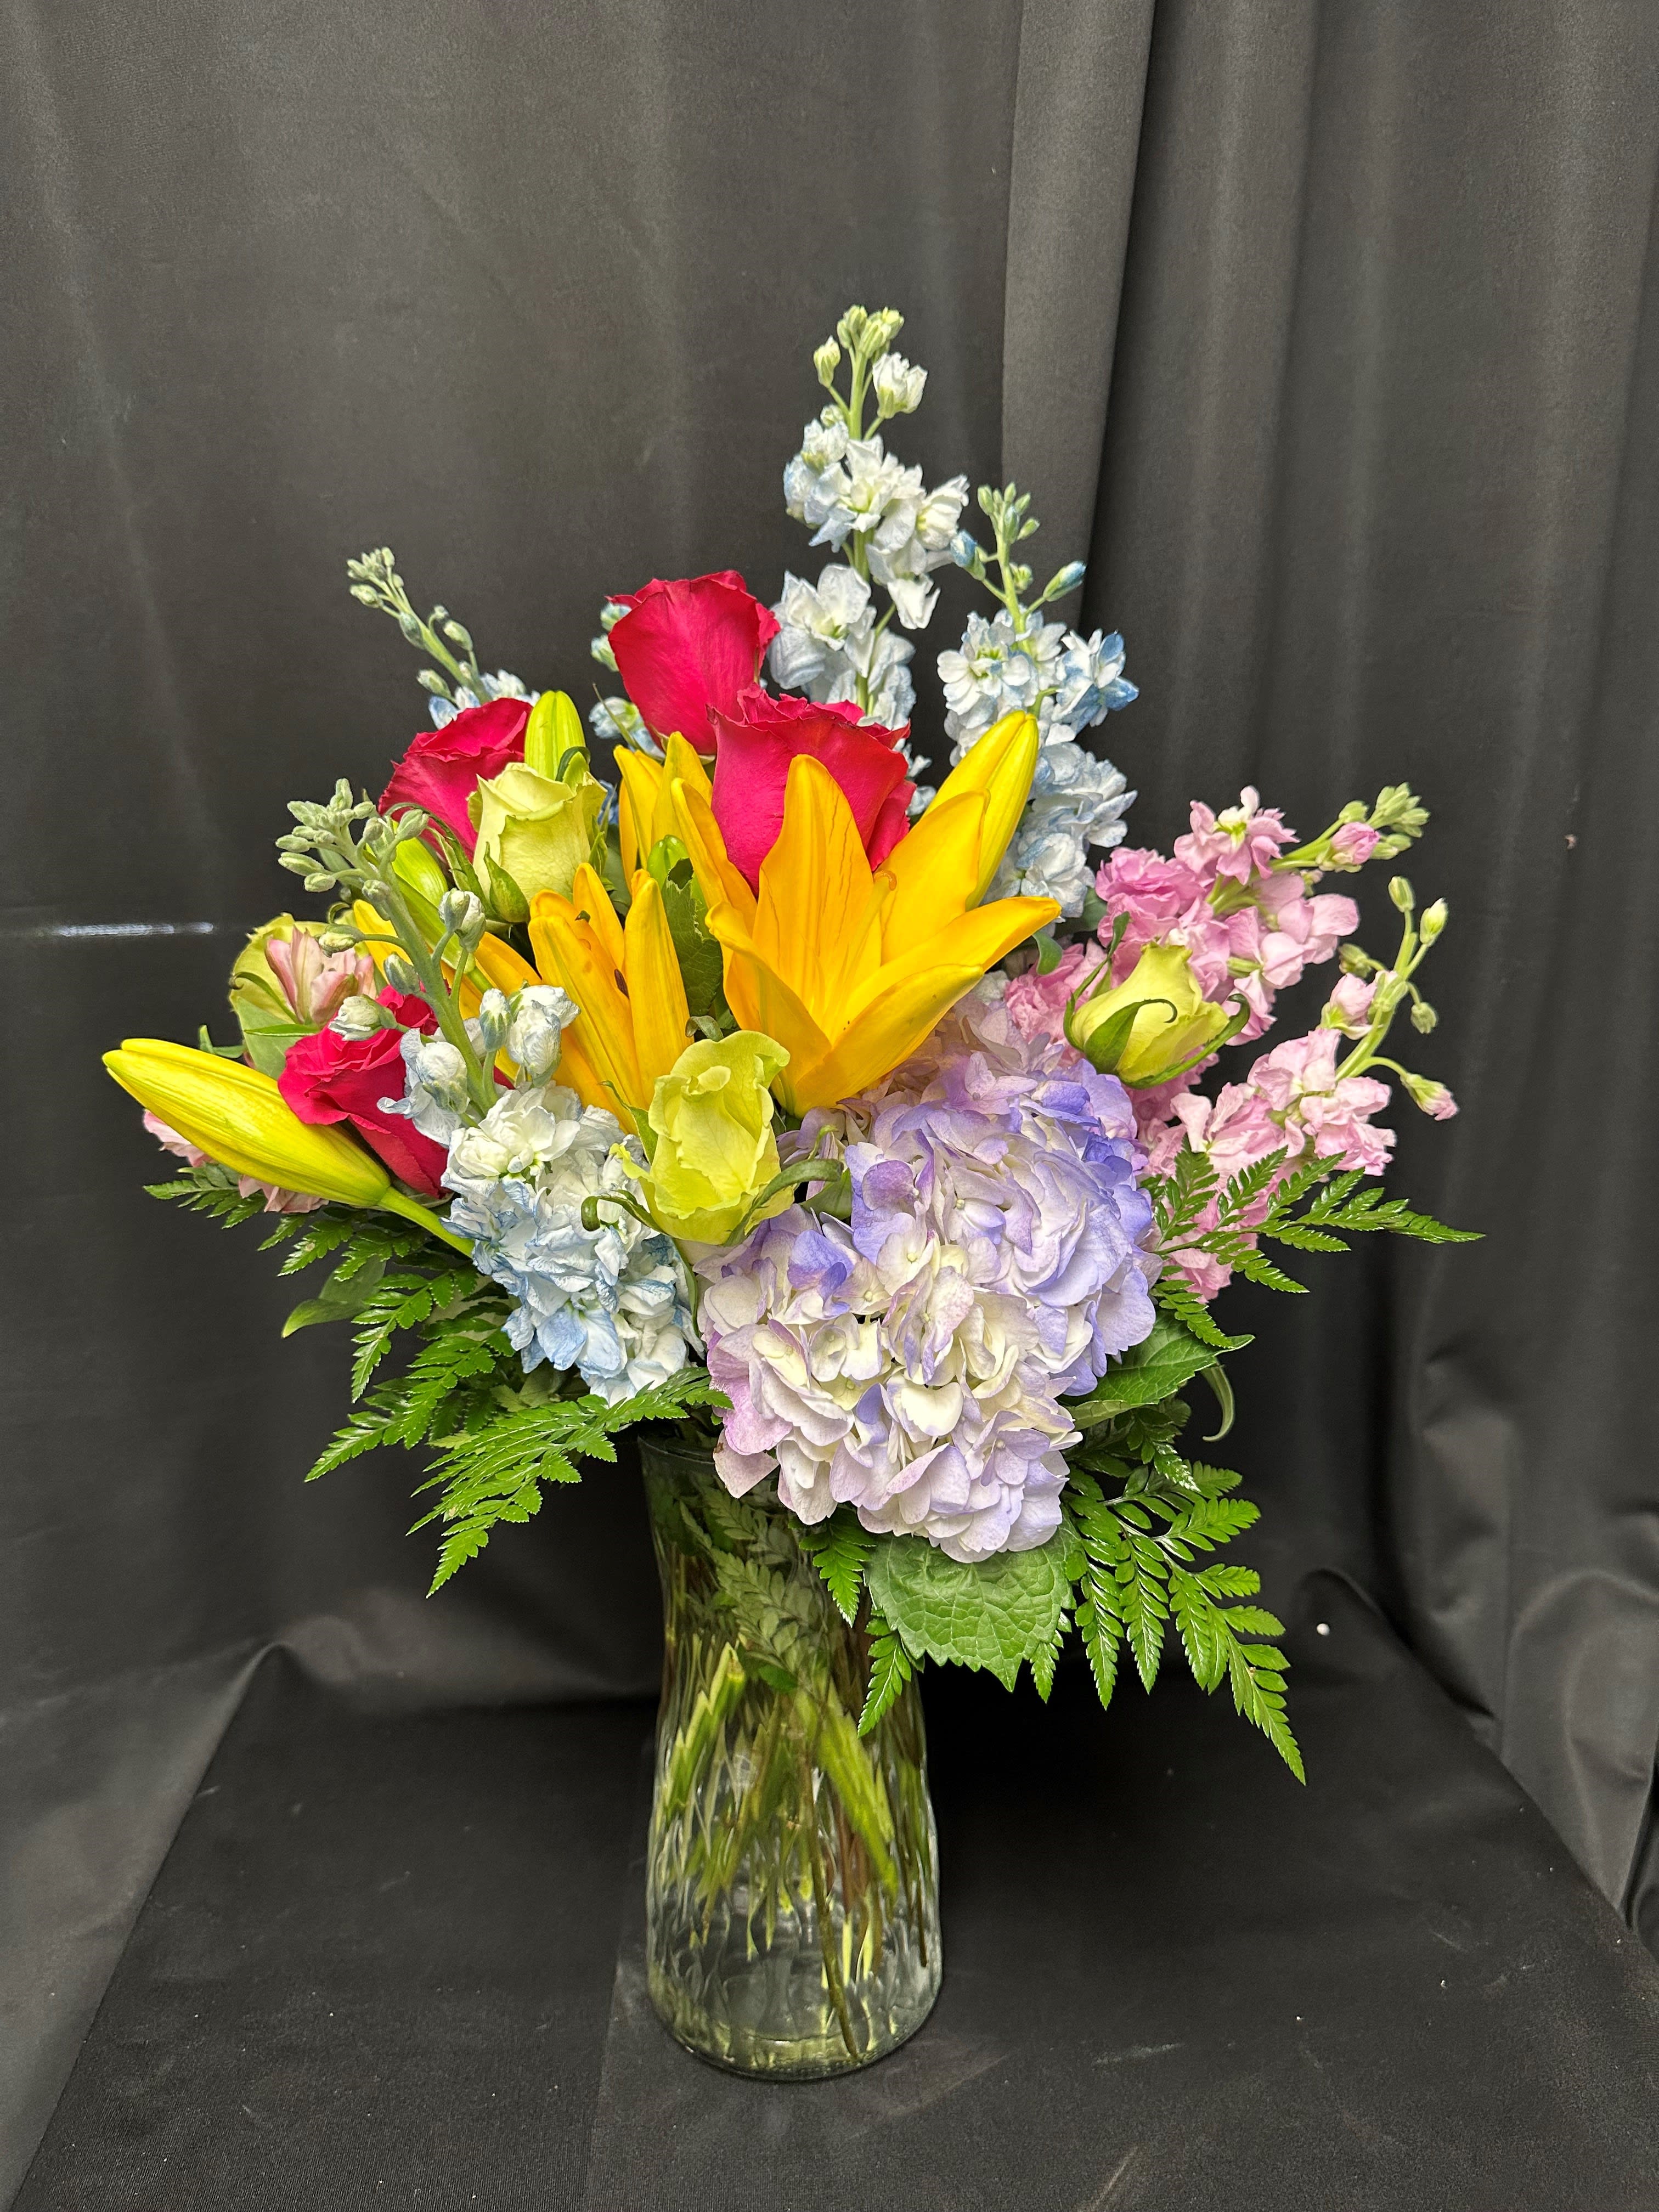 Rainbow Brite -  Take a trip down memory lane to the vibrant days of the '90s with this exuberant arrangement of brightly colored blooms. Radiant yellow lilies stand tall amidst a riot of hot pink roses, pastel blue and pink stock, lush purple hydrangea, and cheerful yellow roses. This nostalgic bouquet is sure to evoke feelings of joy and nostalgia, bringing a burst of color and energy to any space.